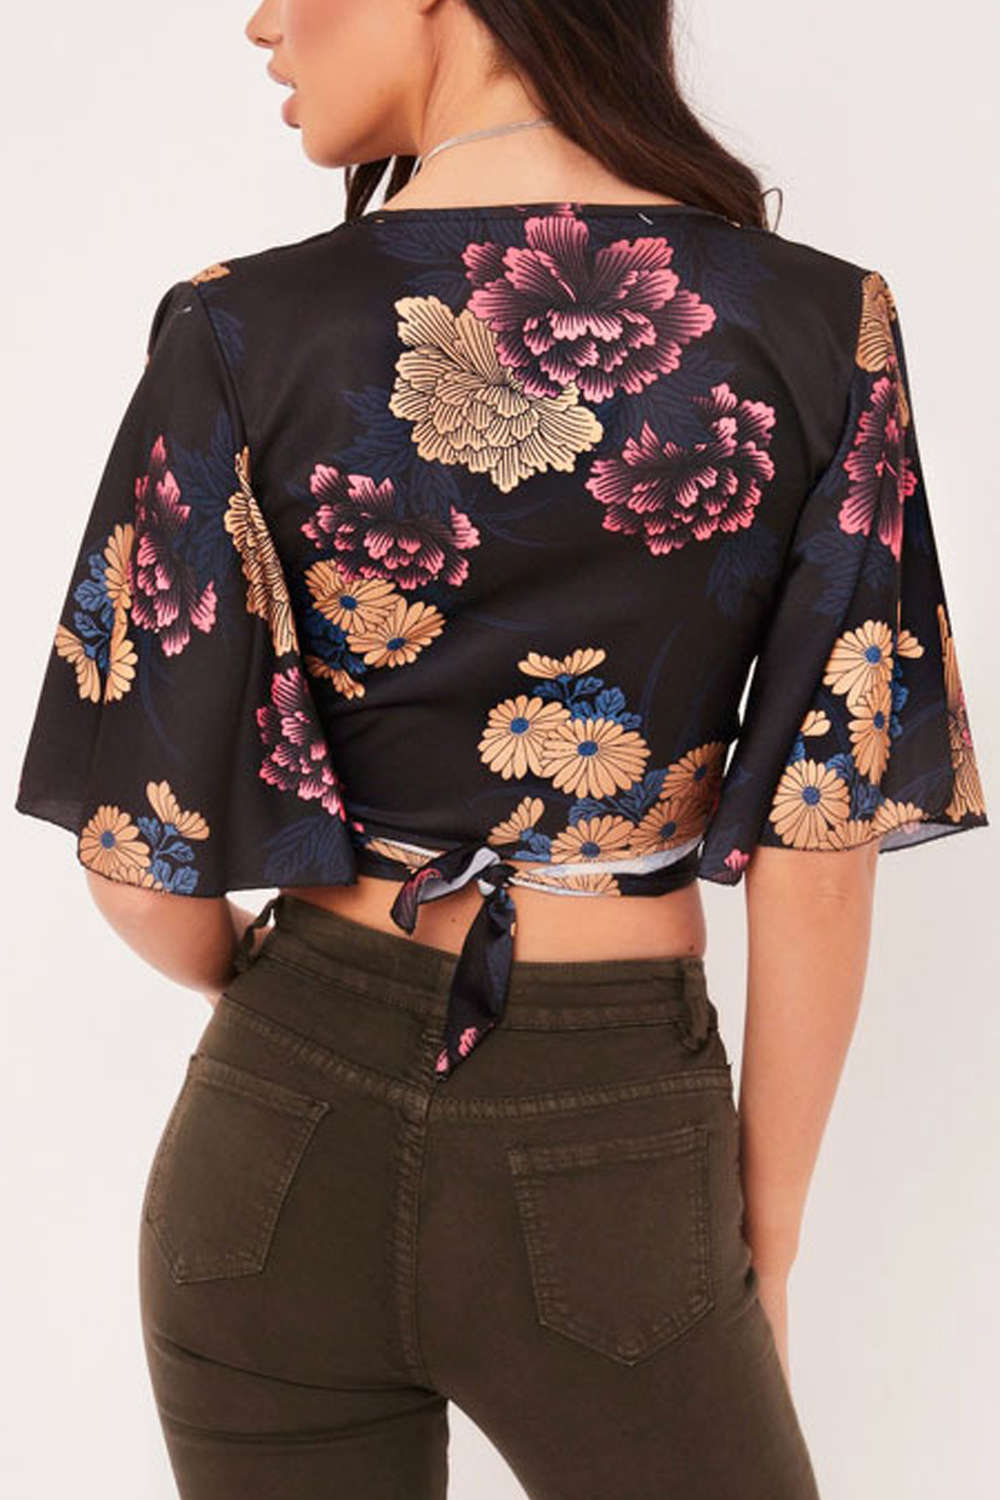 Iyasson Floral Printing Women Bandages Wrapped Crop Top